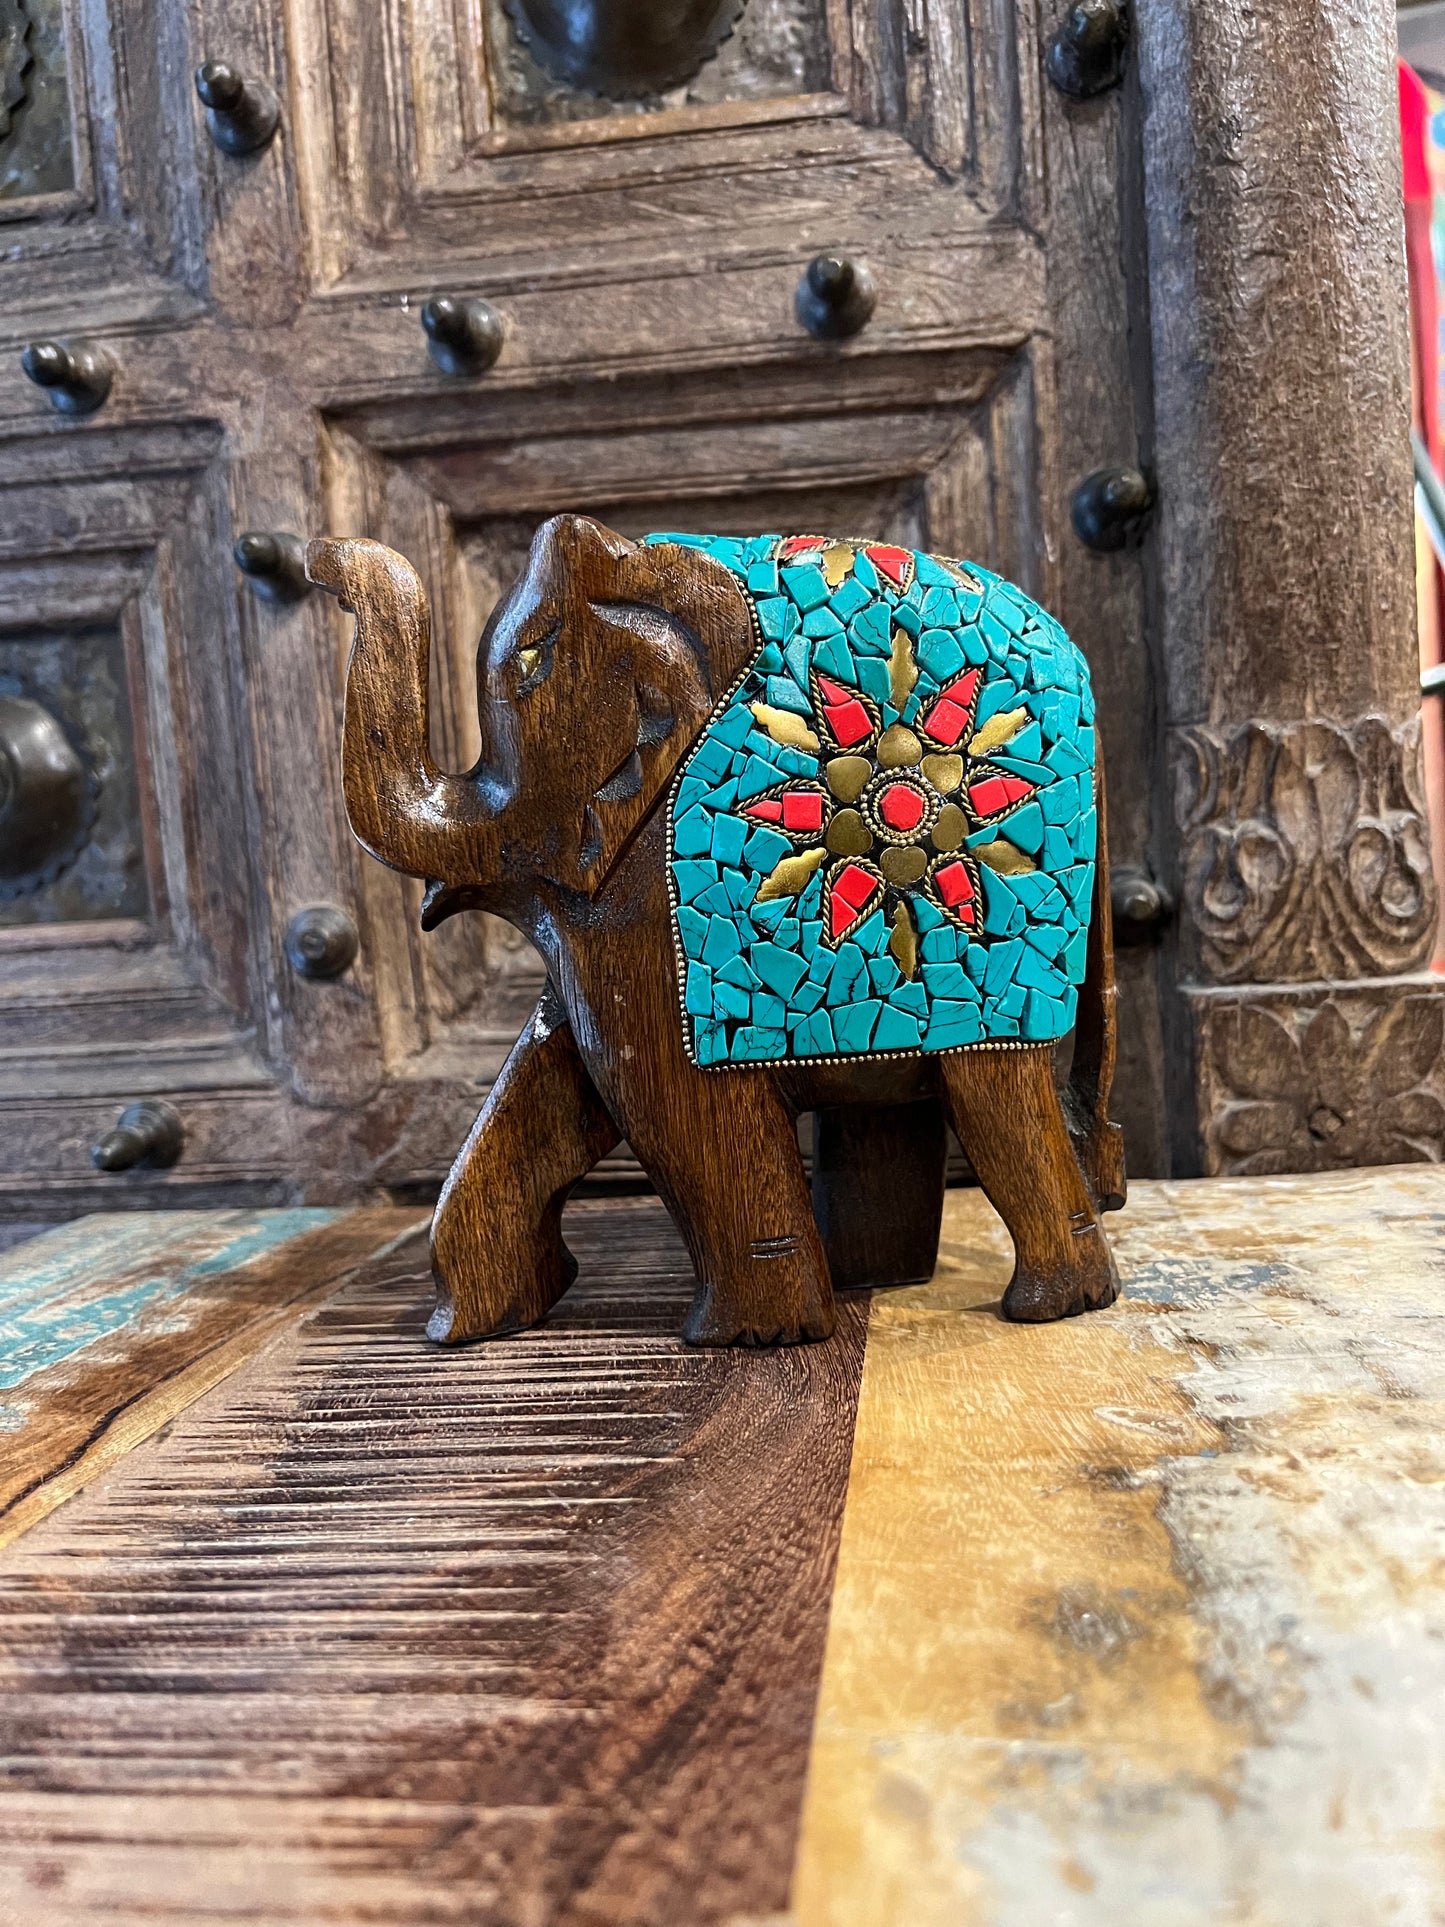 Image of Wooden Elephant with Stone Work. The Source India is an Indian Handicraft, Home Decor, Furnishing and Textiles Store. Our Mission is to allow the enhancement of India's Culture